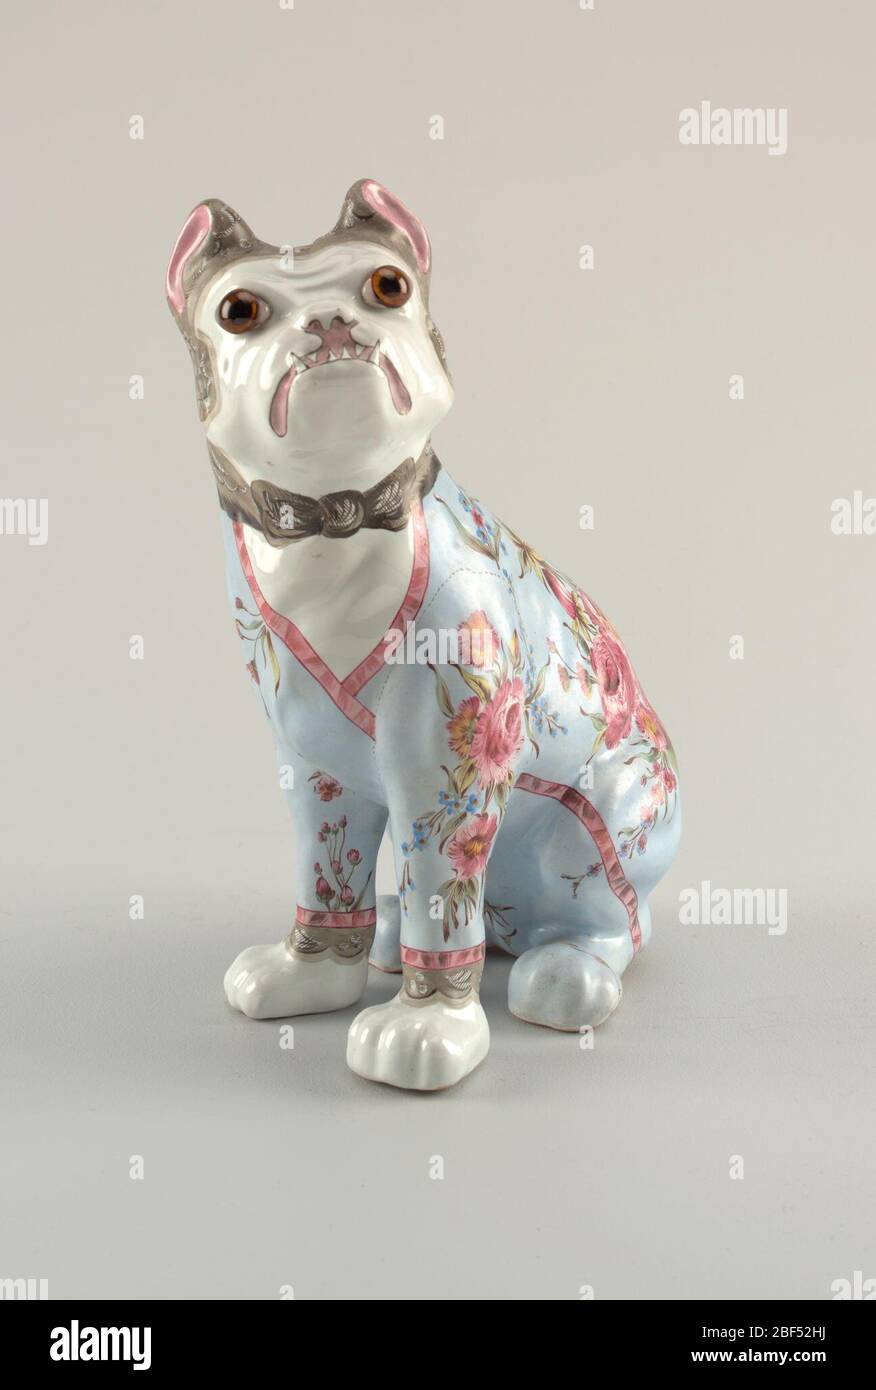 Figure of a dog. Bulldog sitting on haunches, decorated as if wearing light blue dressing gown, banded in red and embellished with predominantly red flowers, a few blue forget-me-nots and green foliage. Stock Photo